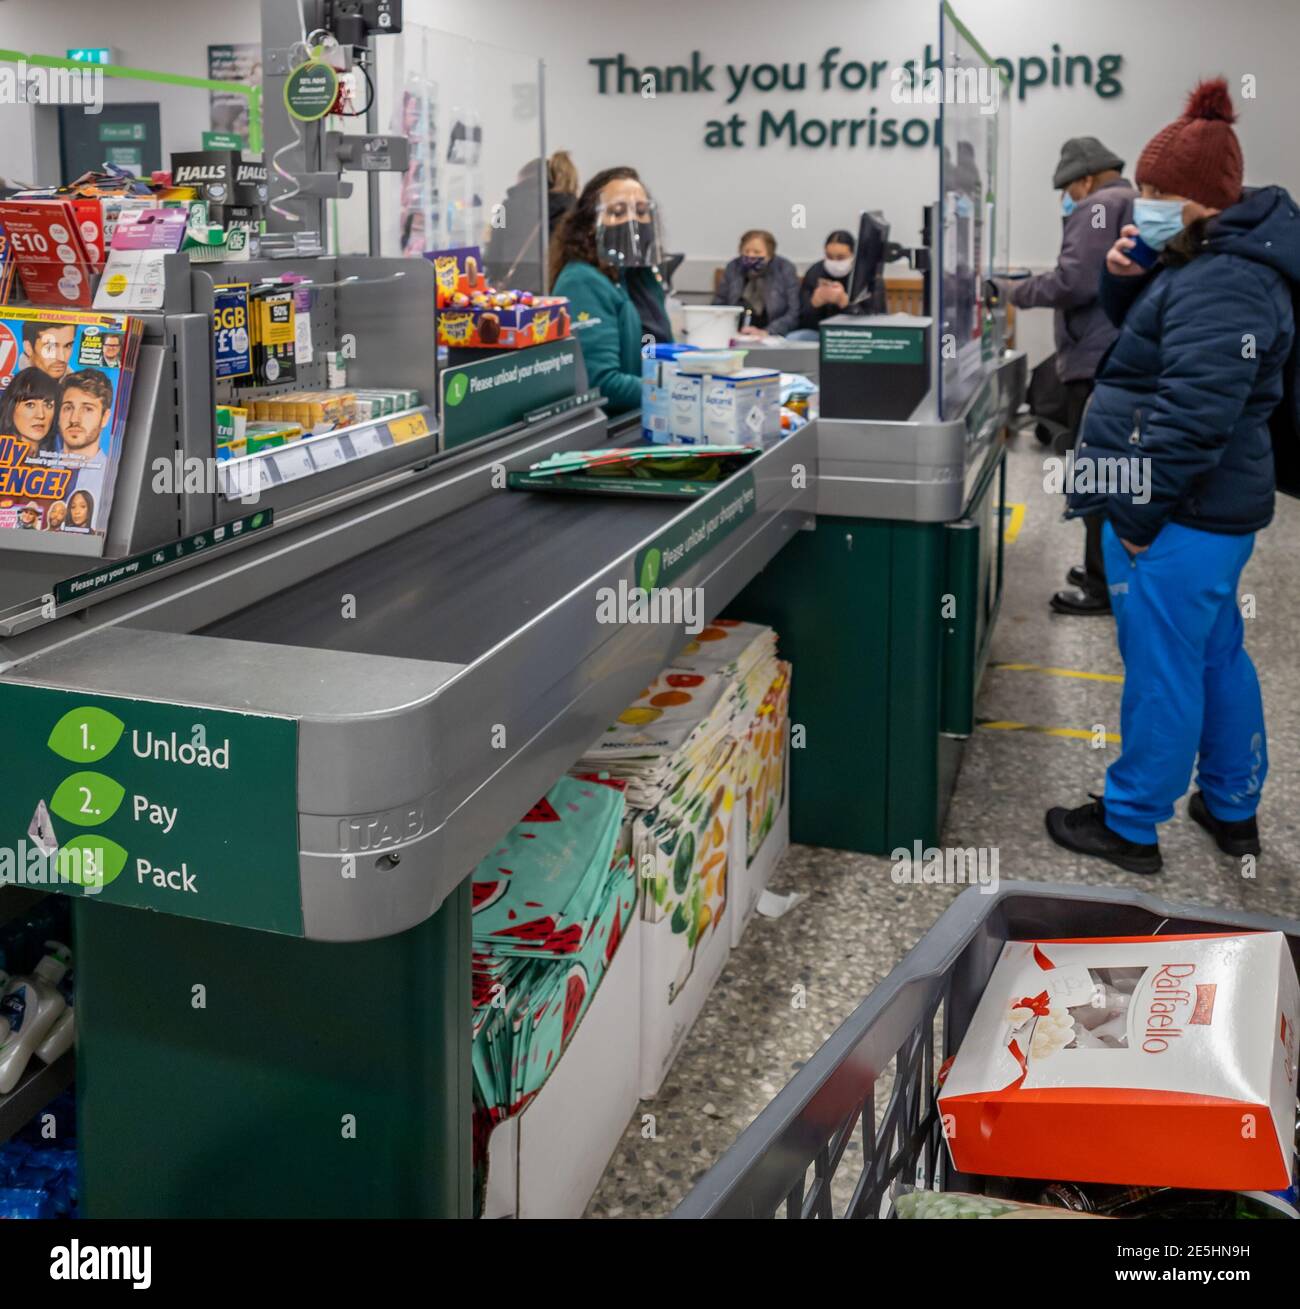 Staffs and customers wearing face covering and separated with a screen in a supermarket checkout as required under Covid-19 safety regulations. Stock Photo